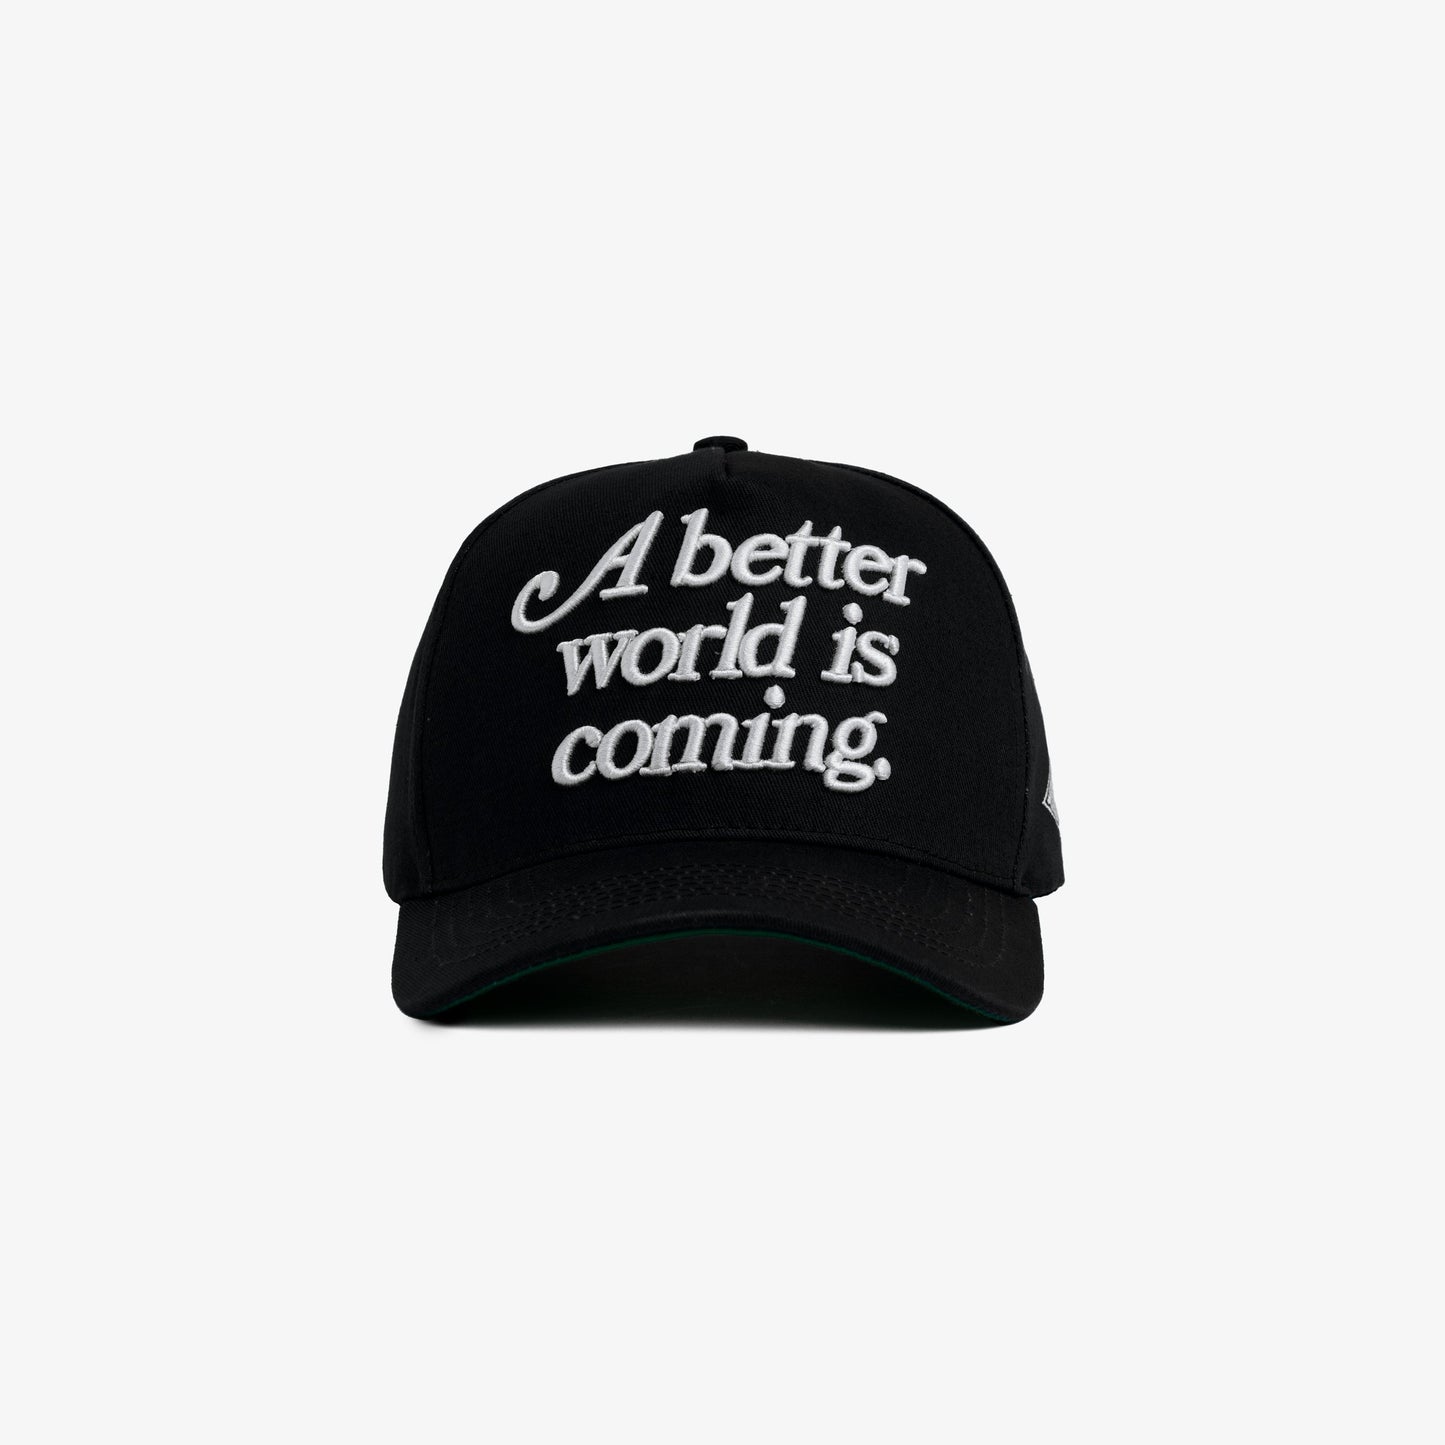 A Better World is Coming Cap (6 Colors)